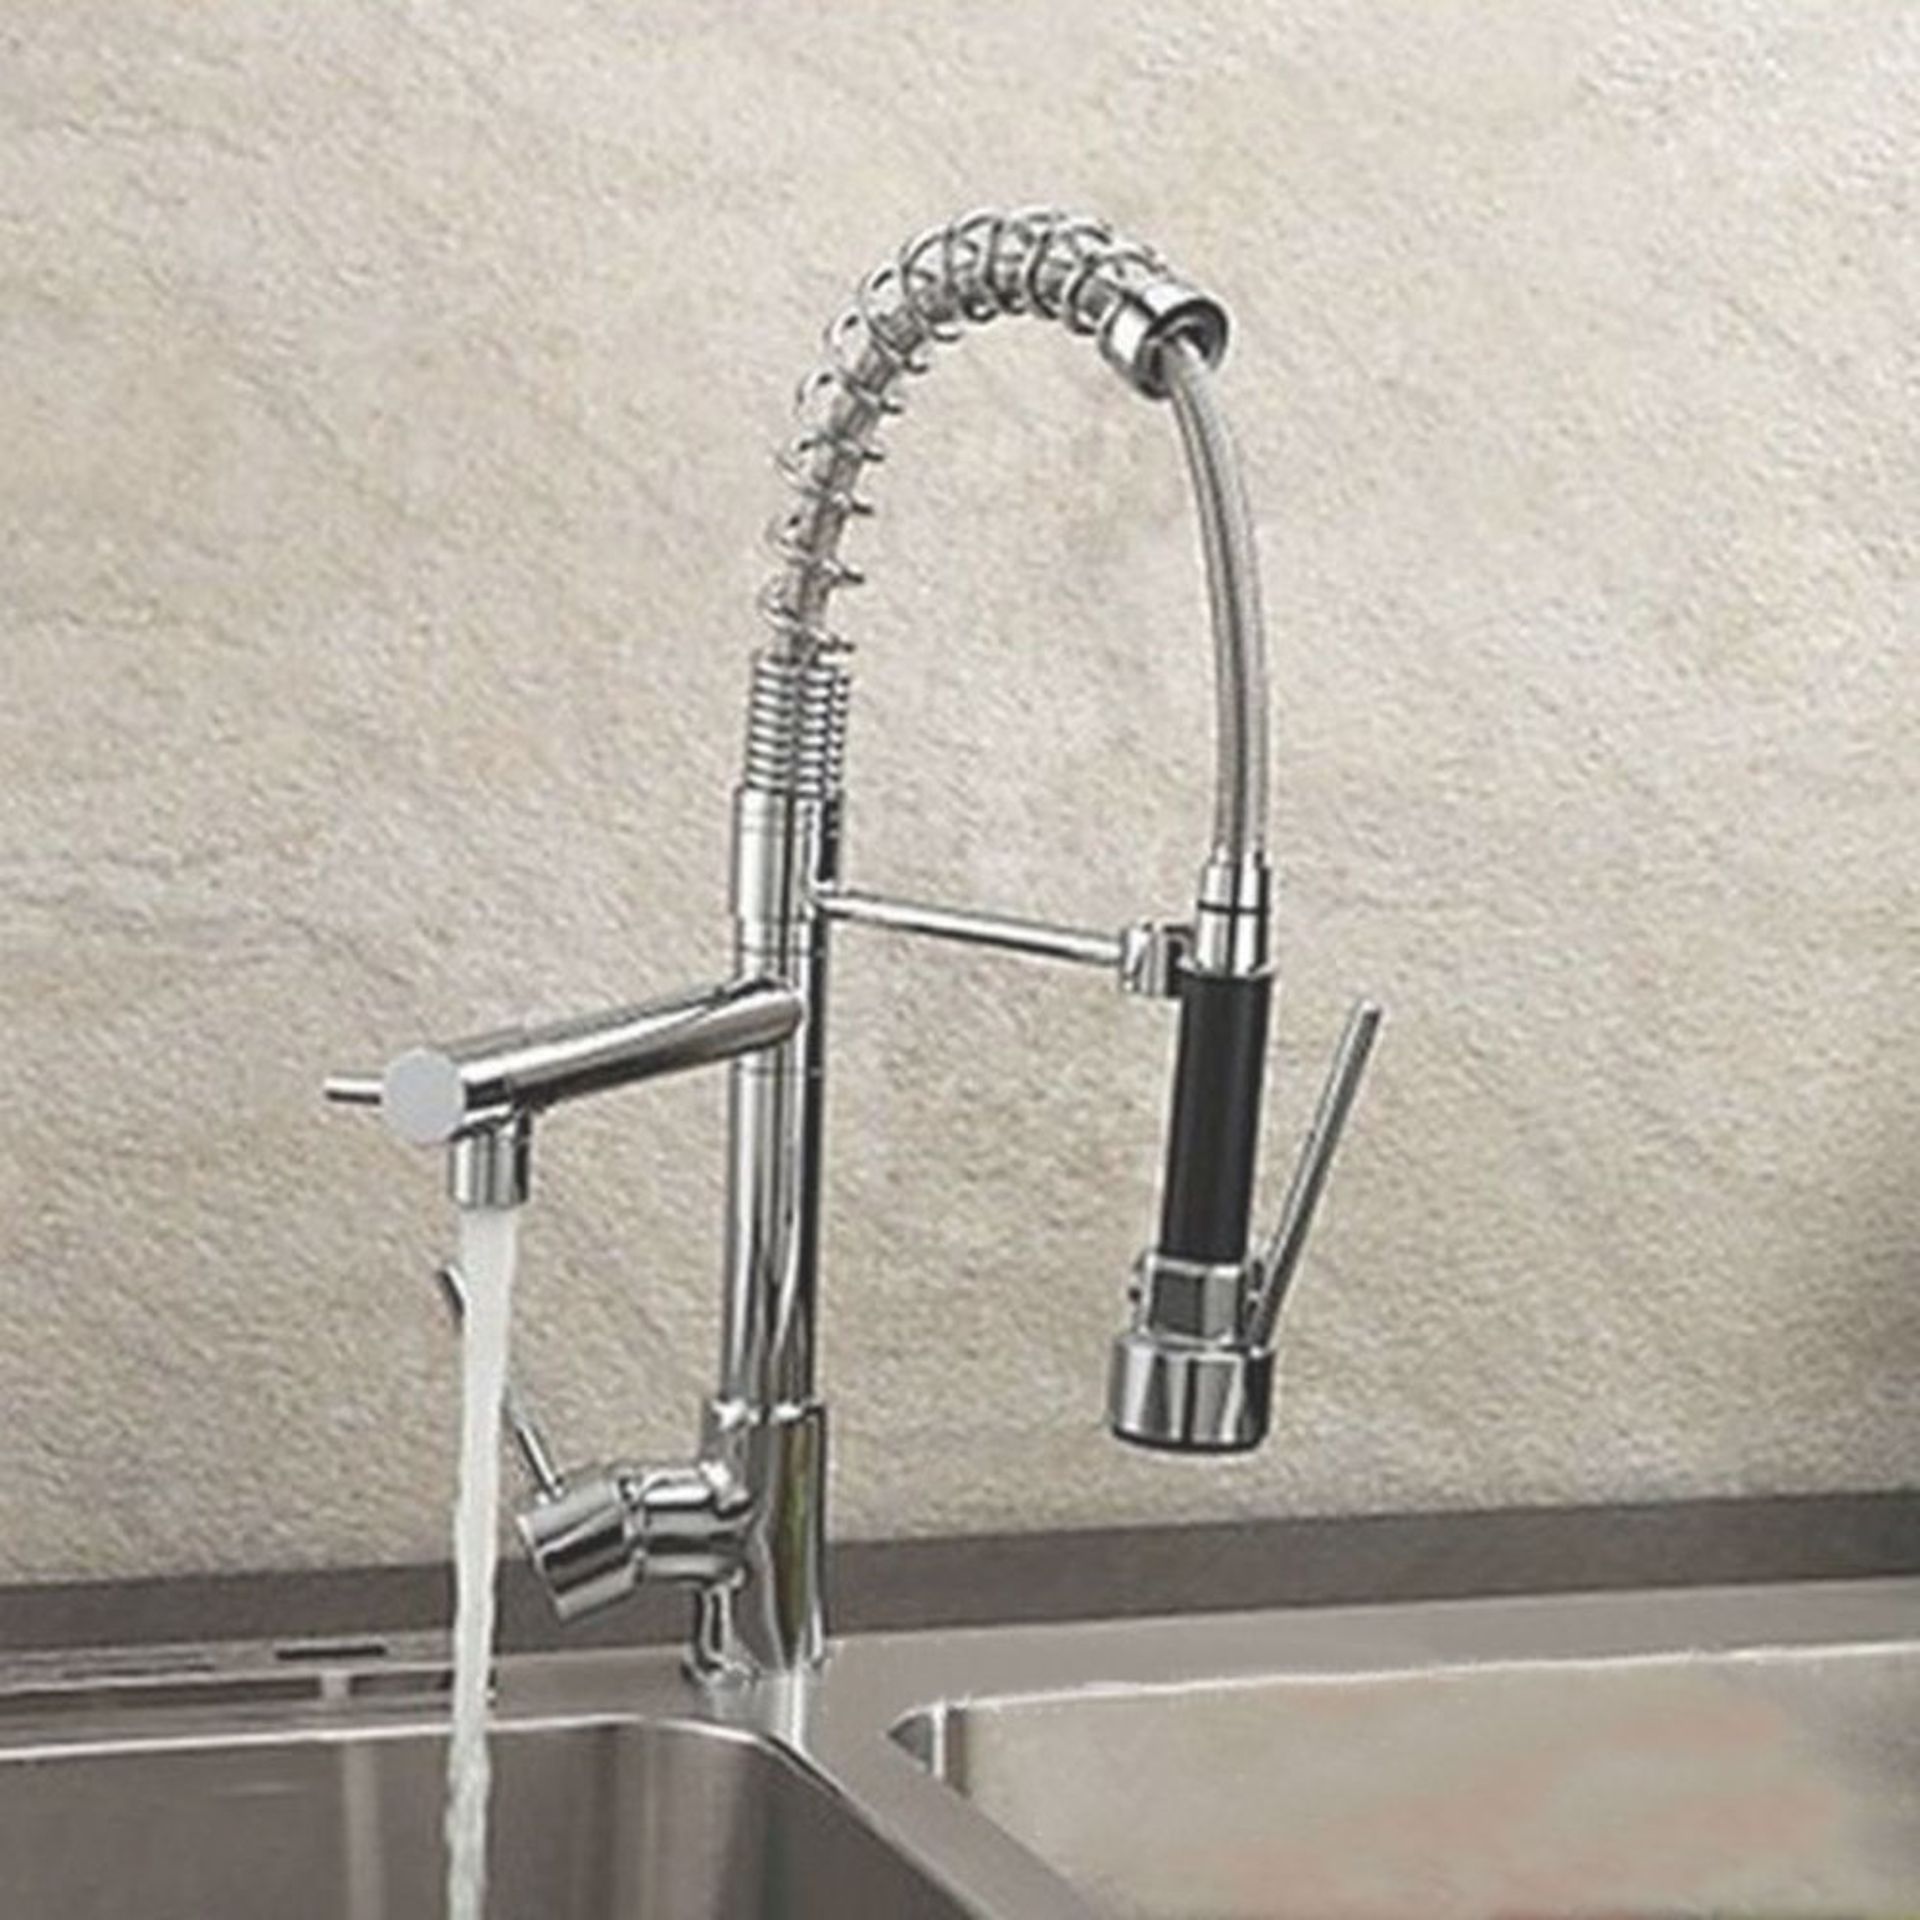 (SM18) Bentley Modern Monobloc Chrome Brass Pull Out Spray Mixer Tap. RRP £349.99. This tap is